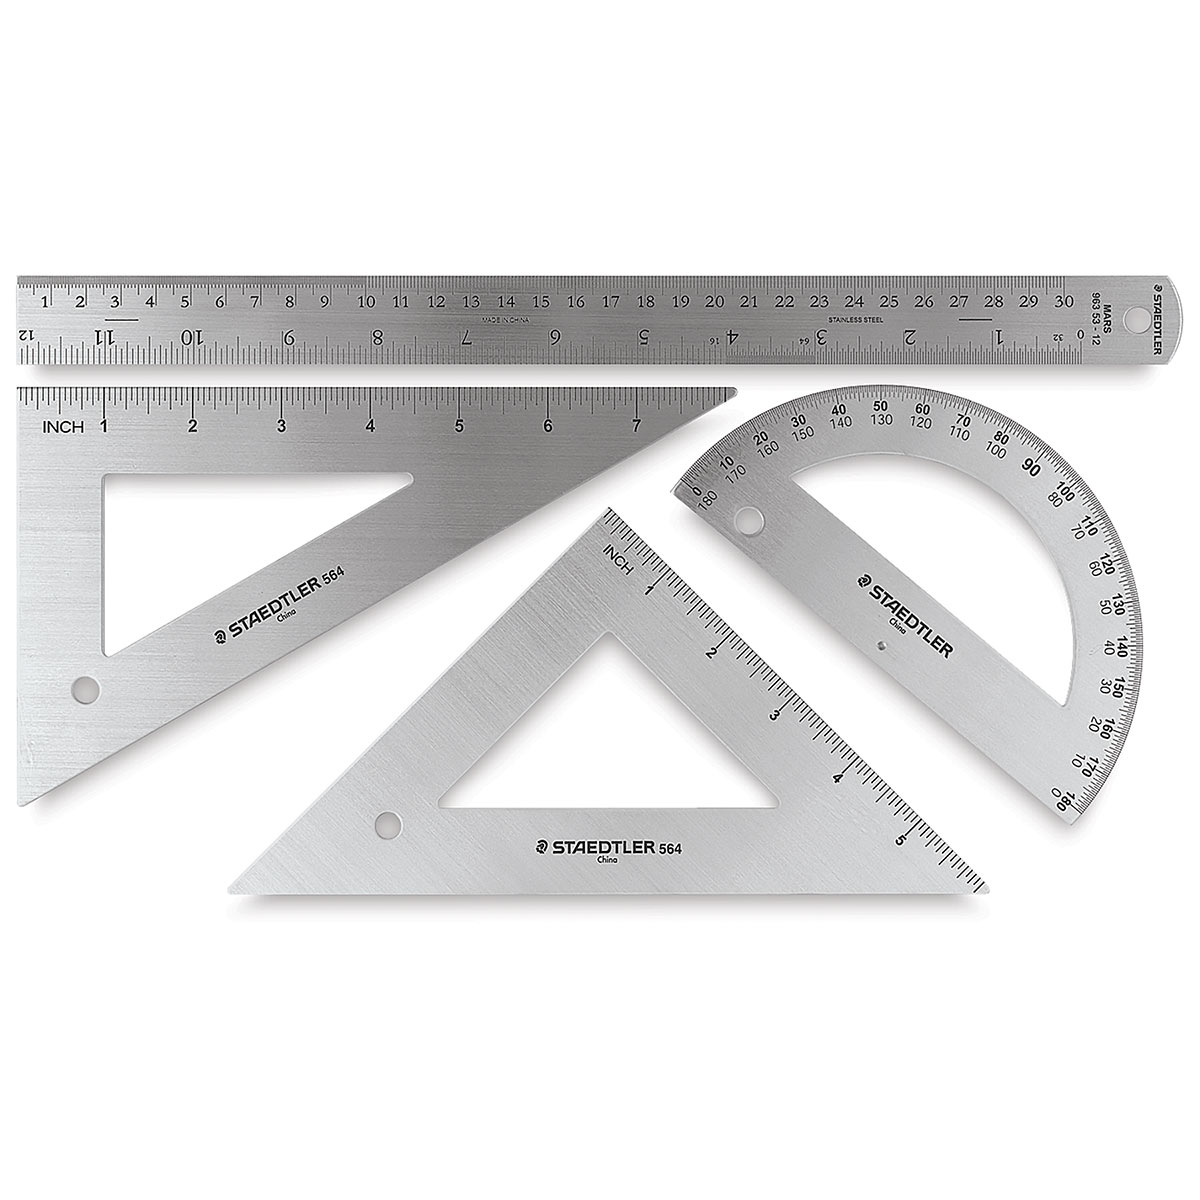 Rulers and set squares for school, professional use and technical